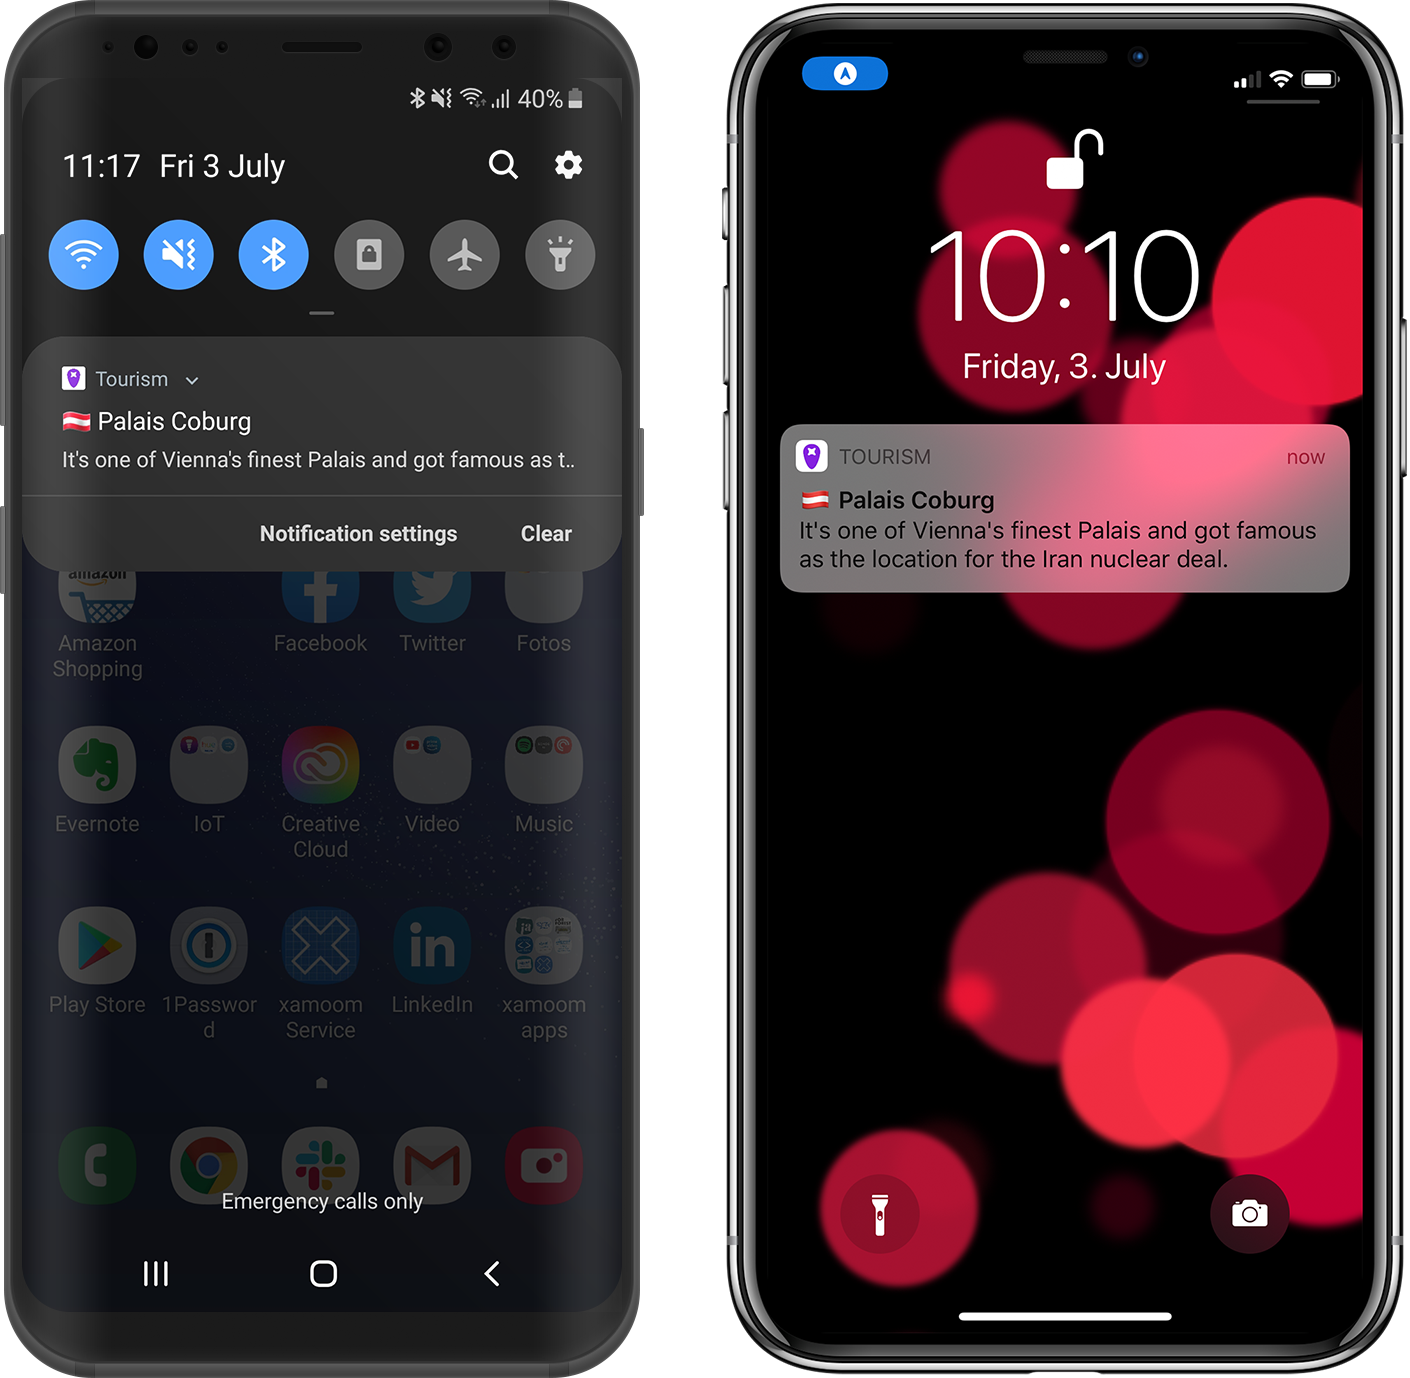 xamoom notifications work on both iOS and Android ...